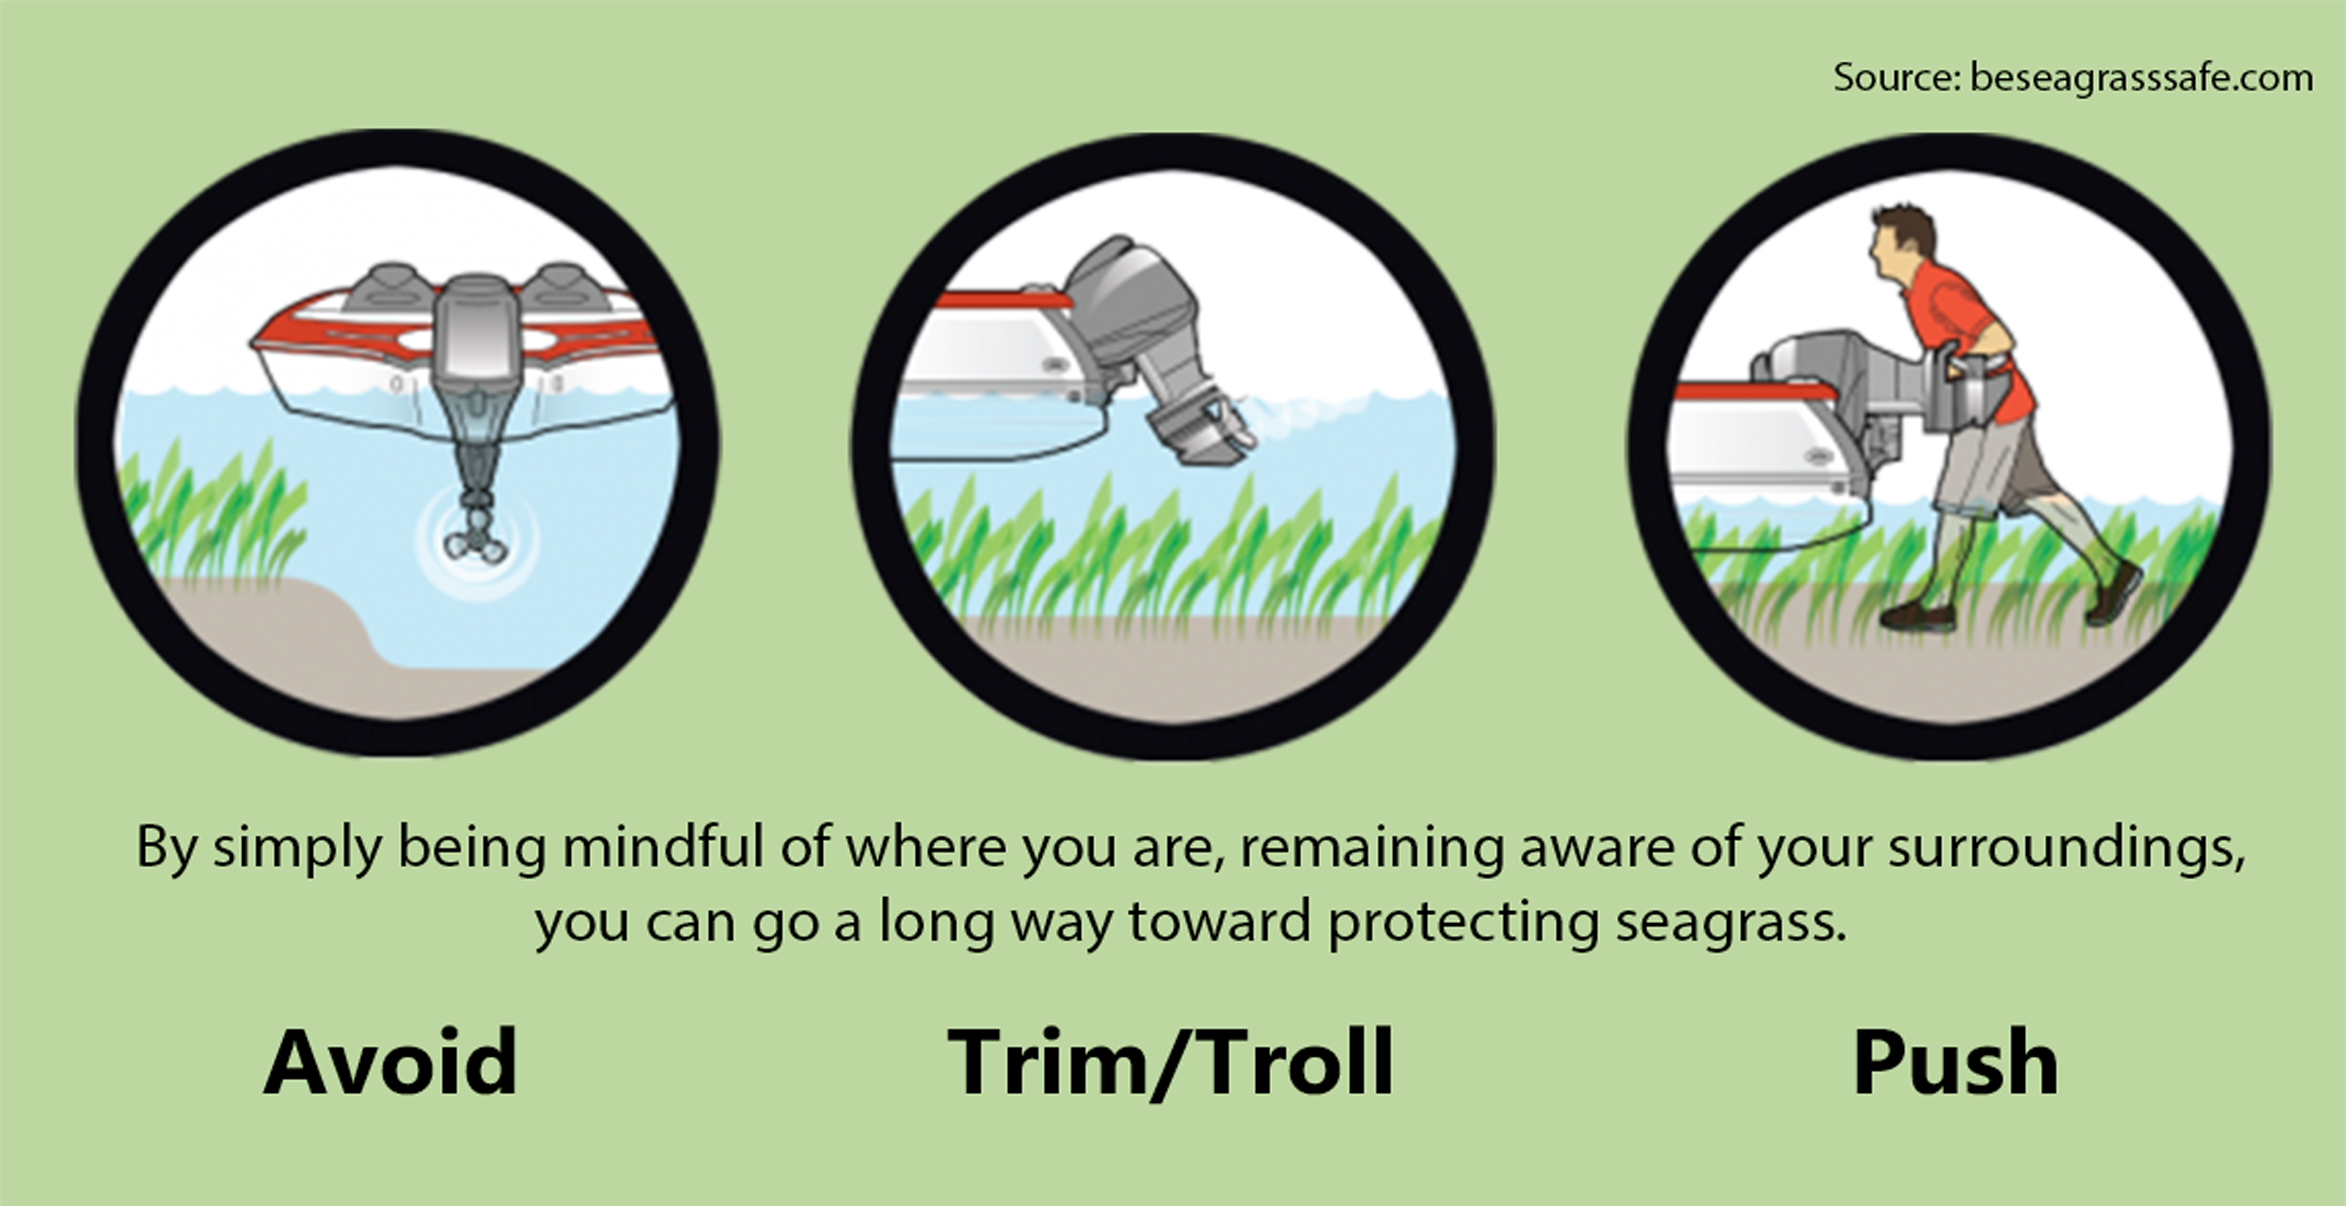 Be seagrass safe